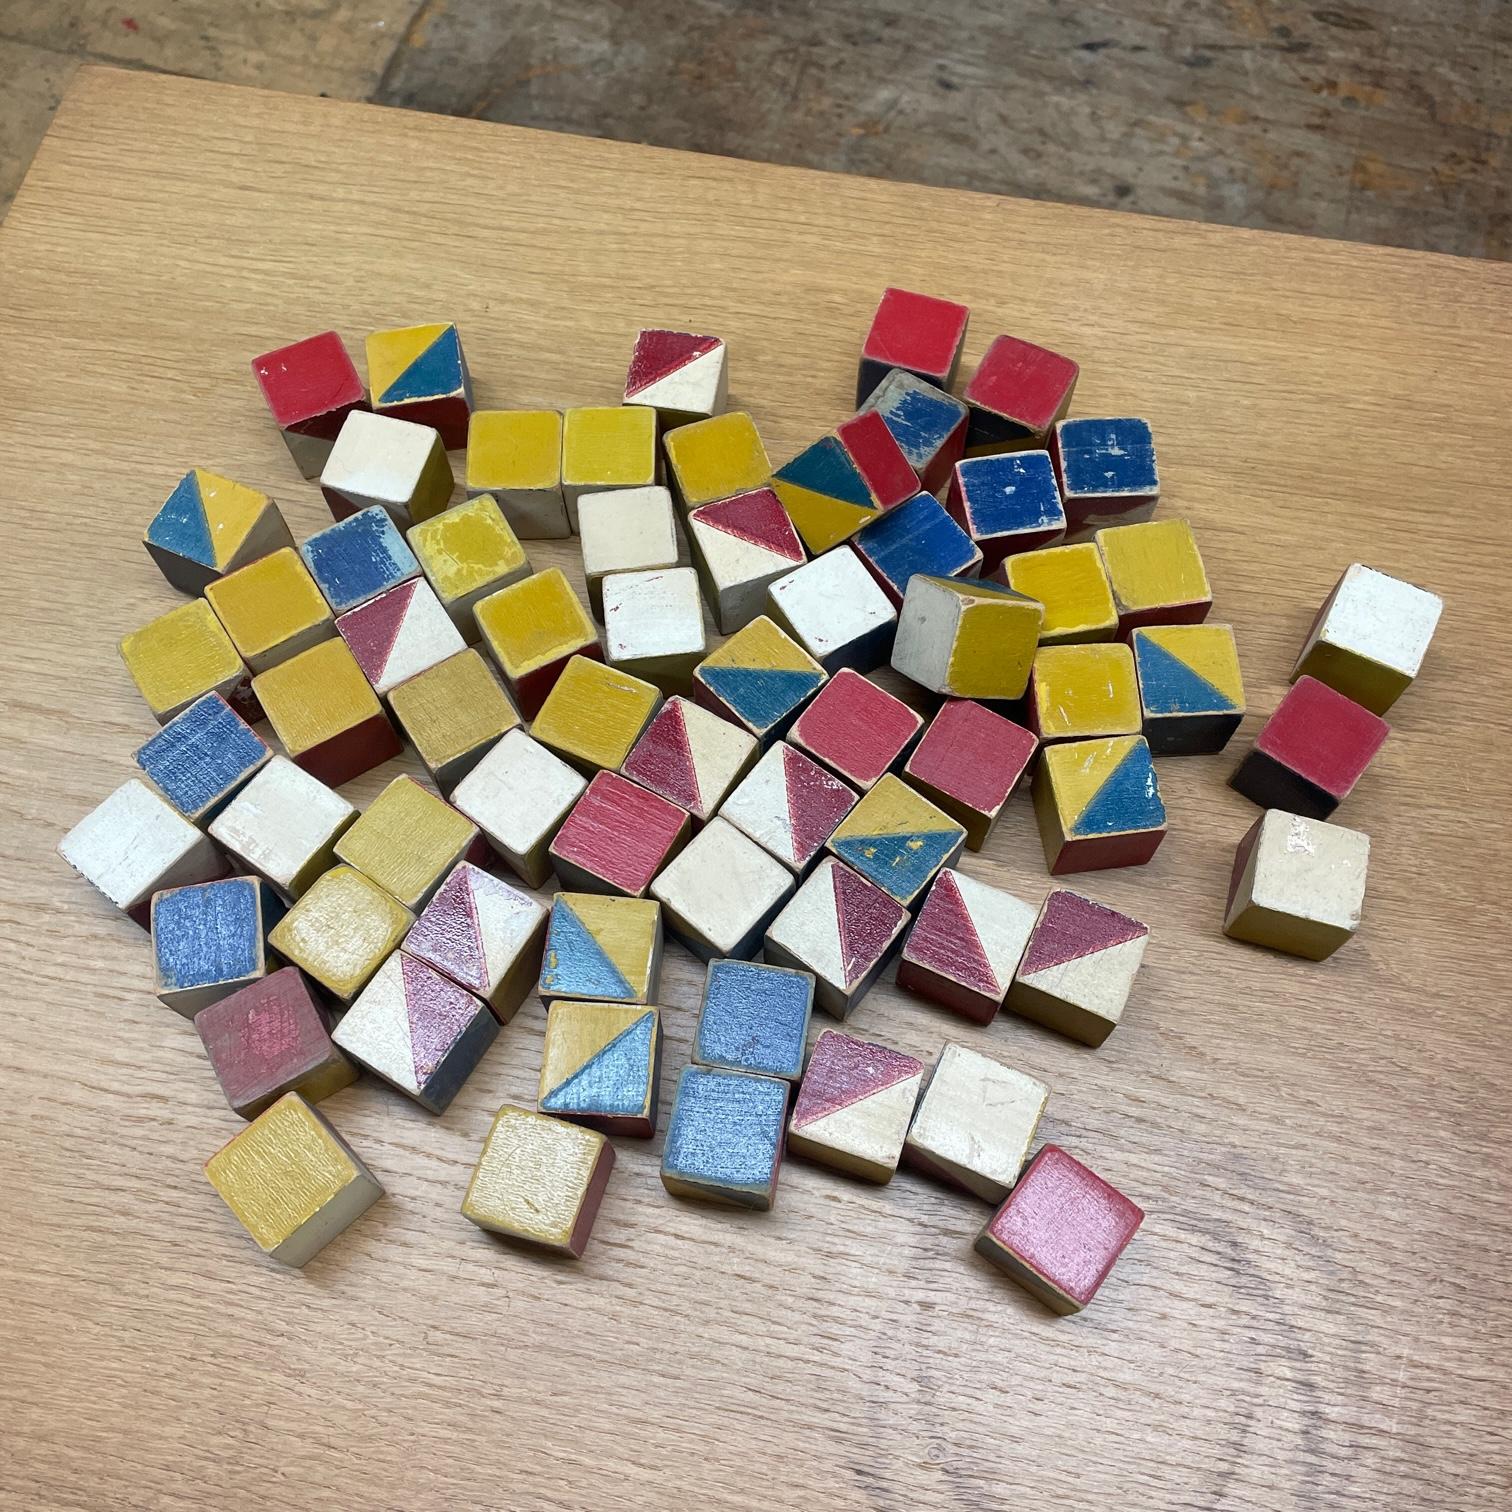 Huge lot of 67 Bauhaus style wooden blocks. Architectural pattern making toys. Sold as found, unrestored condition. 1 1/16 inch cubes.